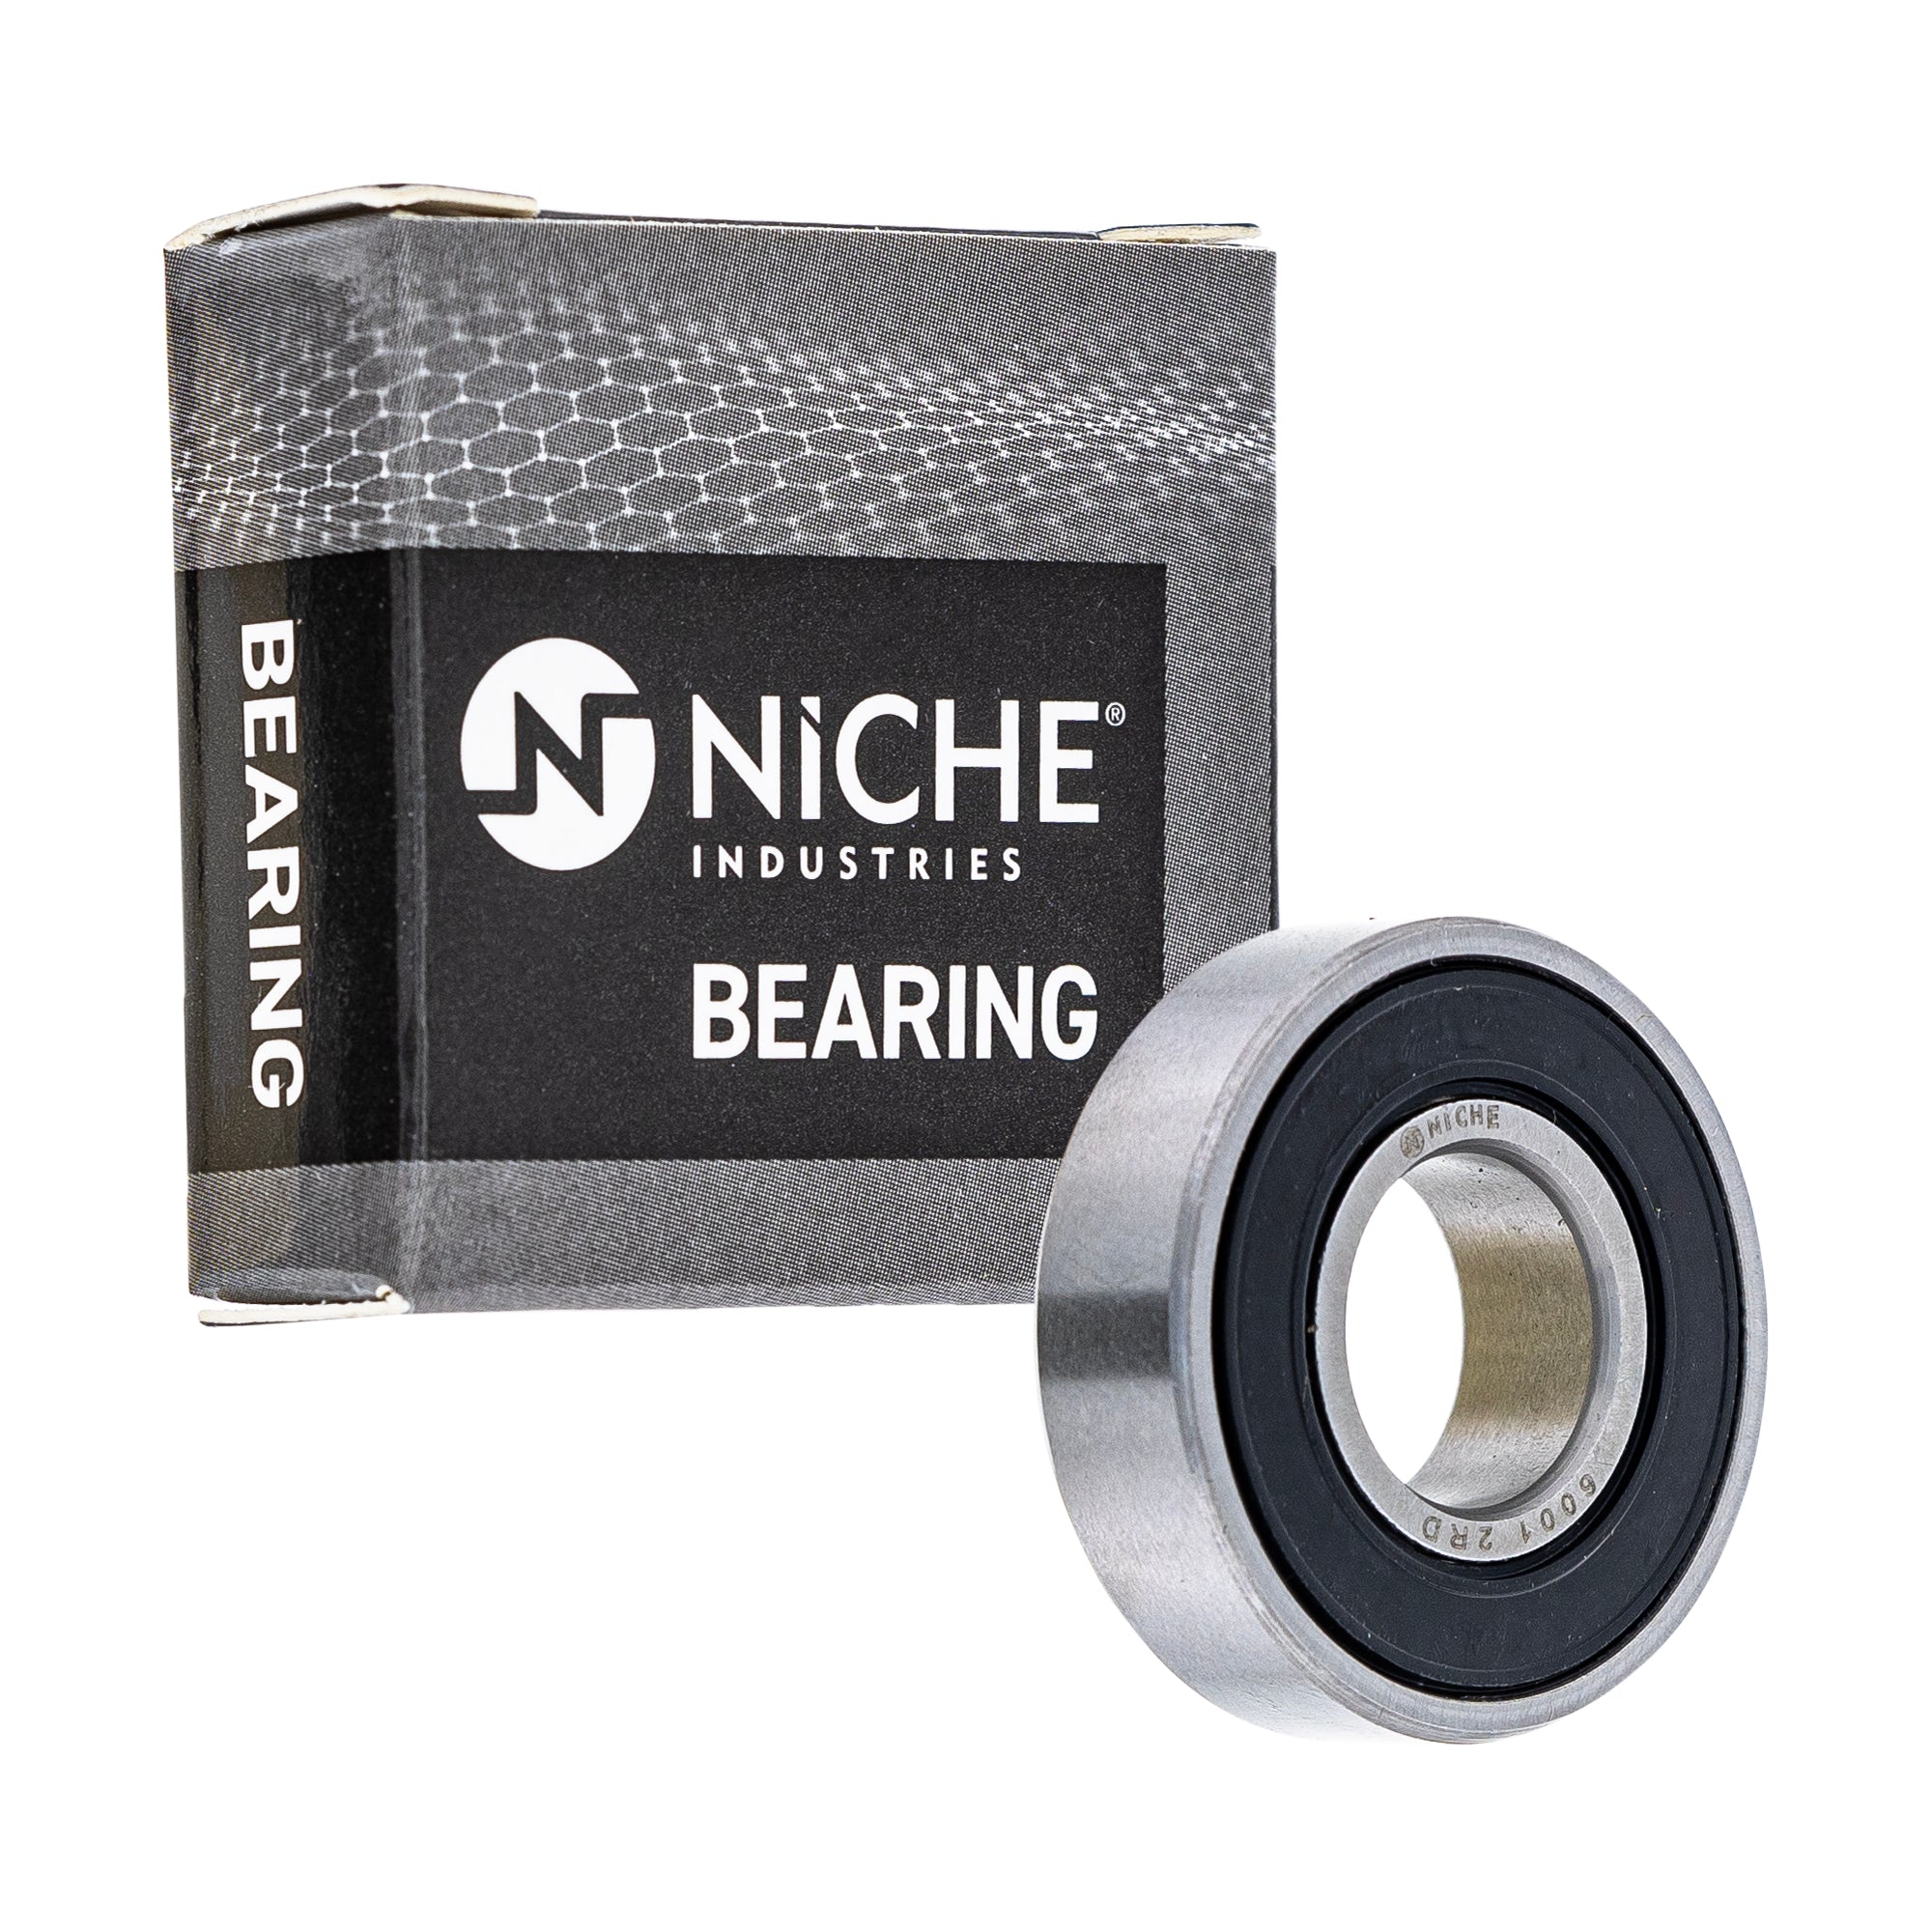 NICHE 519-CBB2333R Bearing for zOTHER YZ80 HT3813 HT3810 HS80